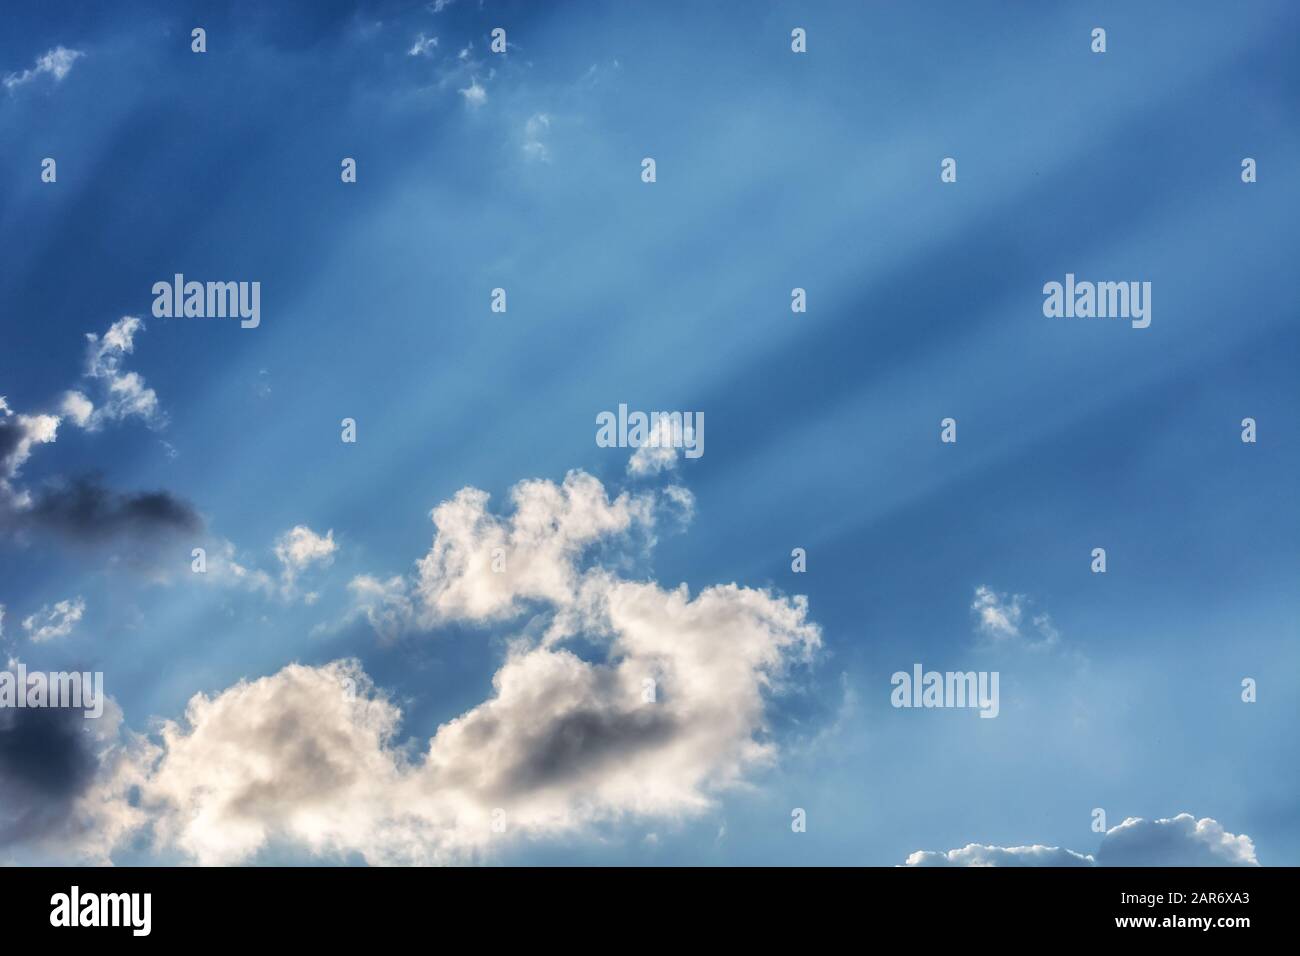 Rays of the sun breaking through the clouds against a bright blue sky, for use as an abstract background and texture. Stock Photo